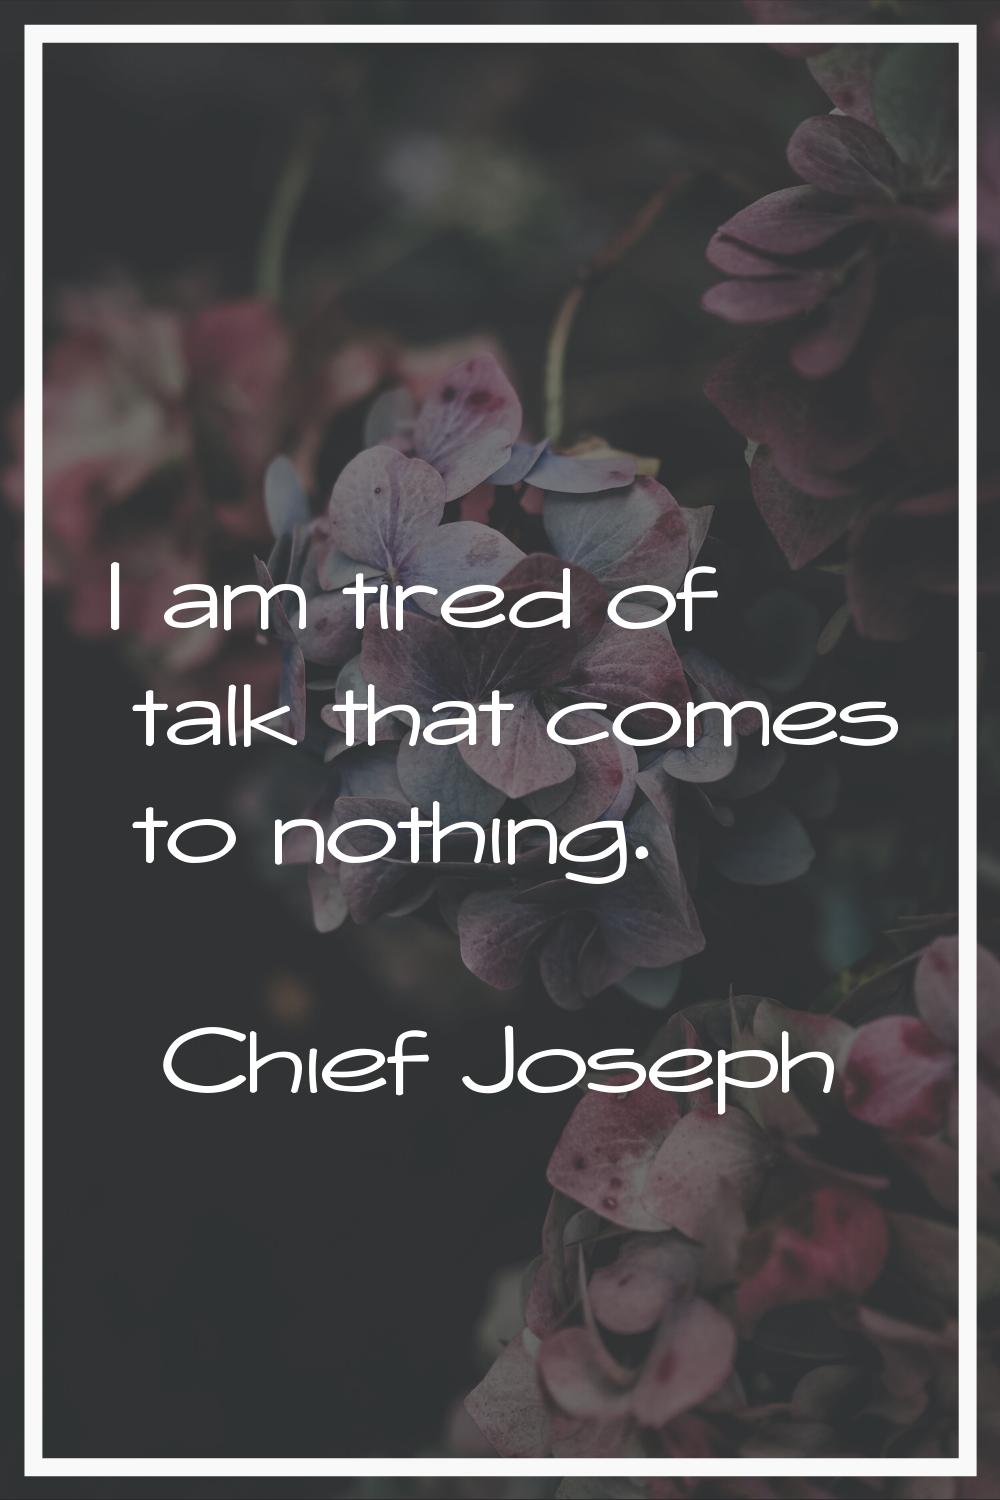 I am tired of talk that comes to nothing.